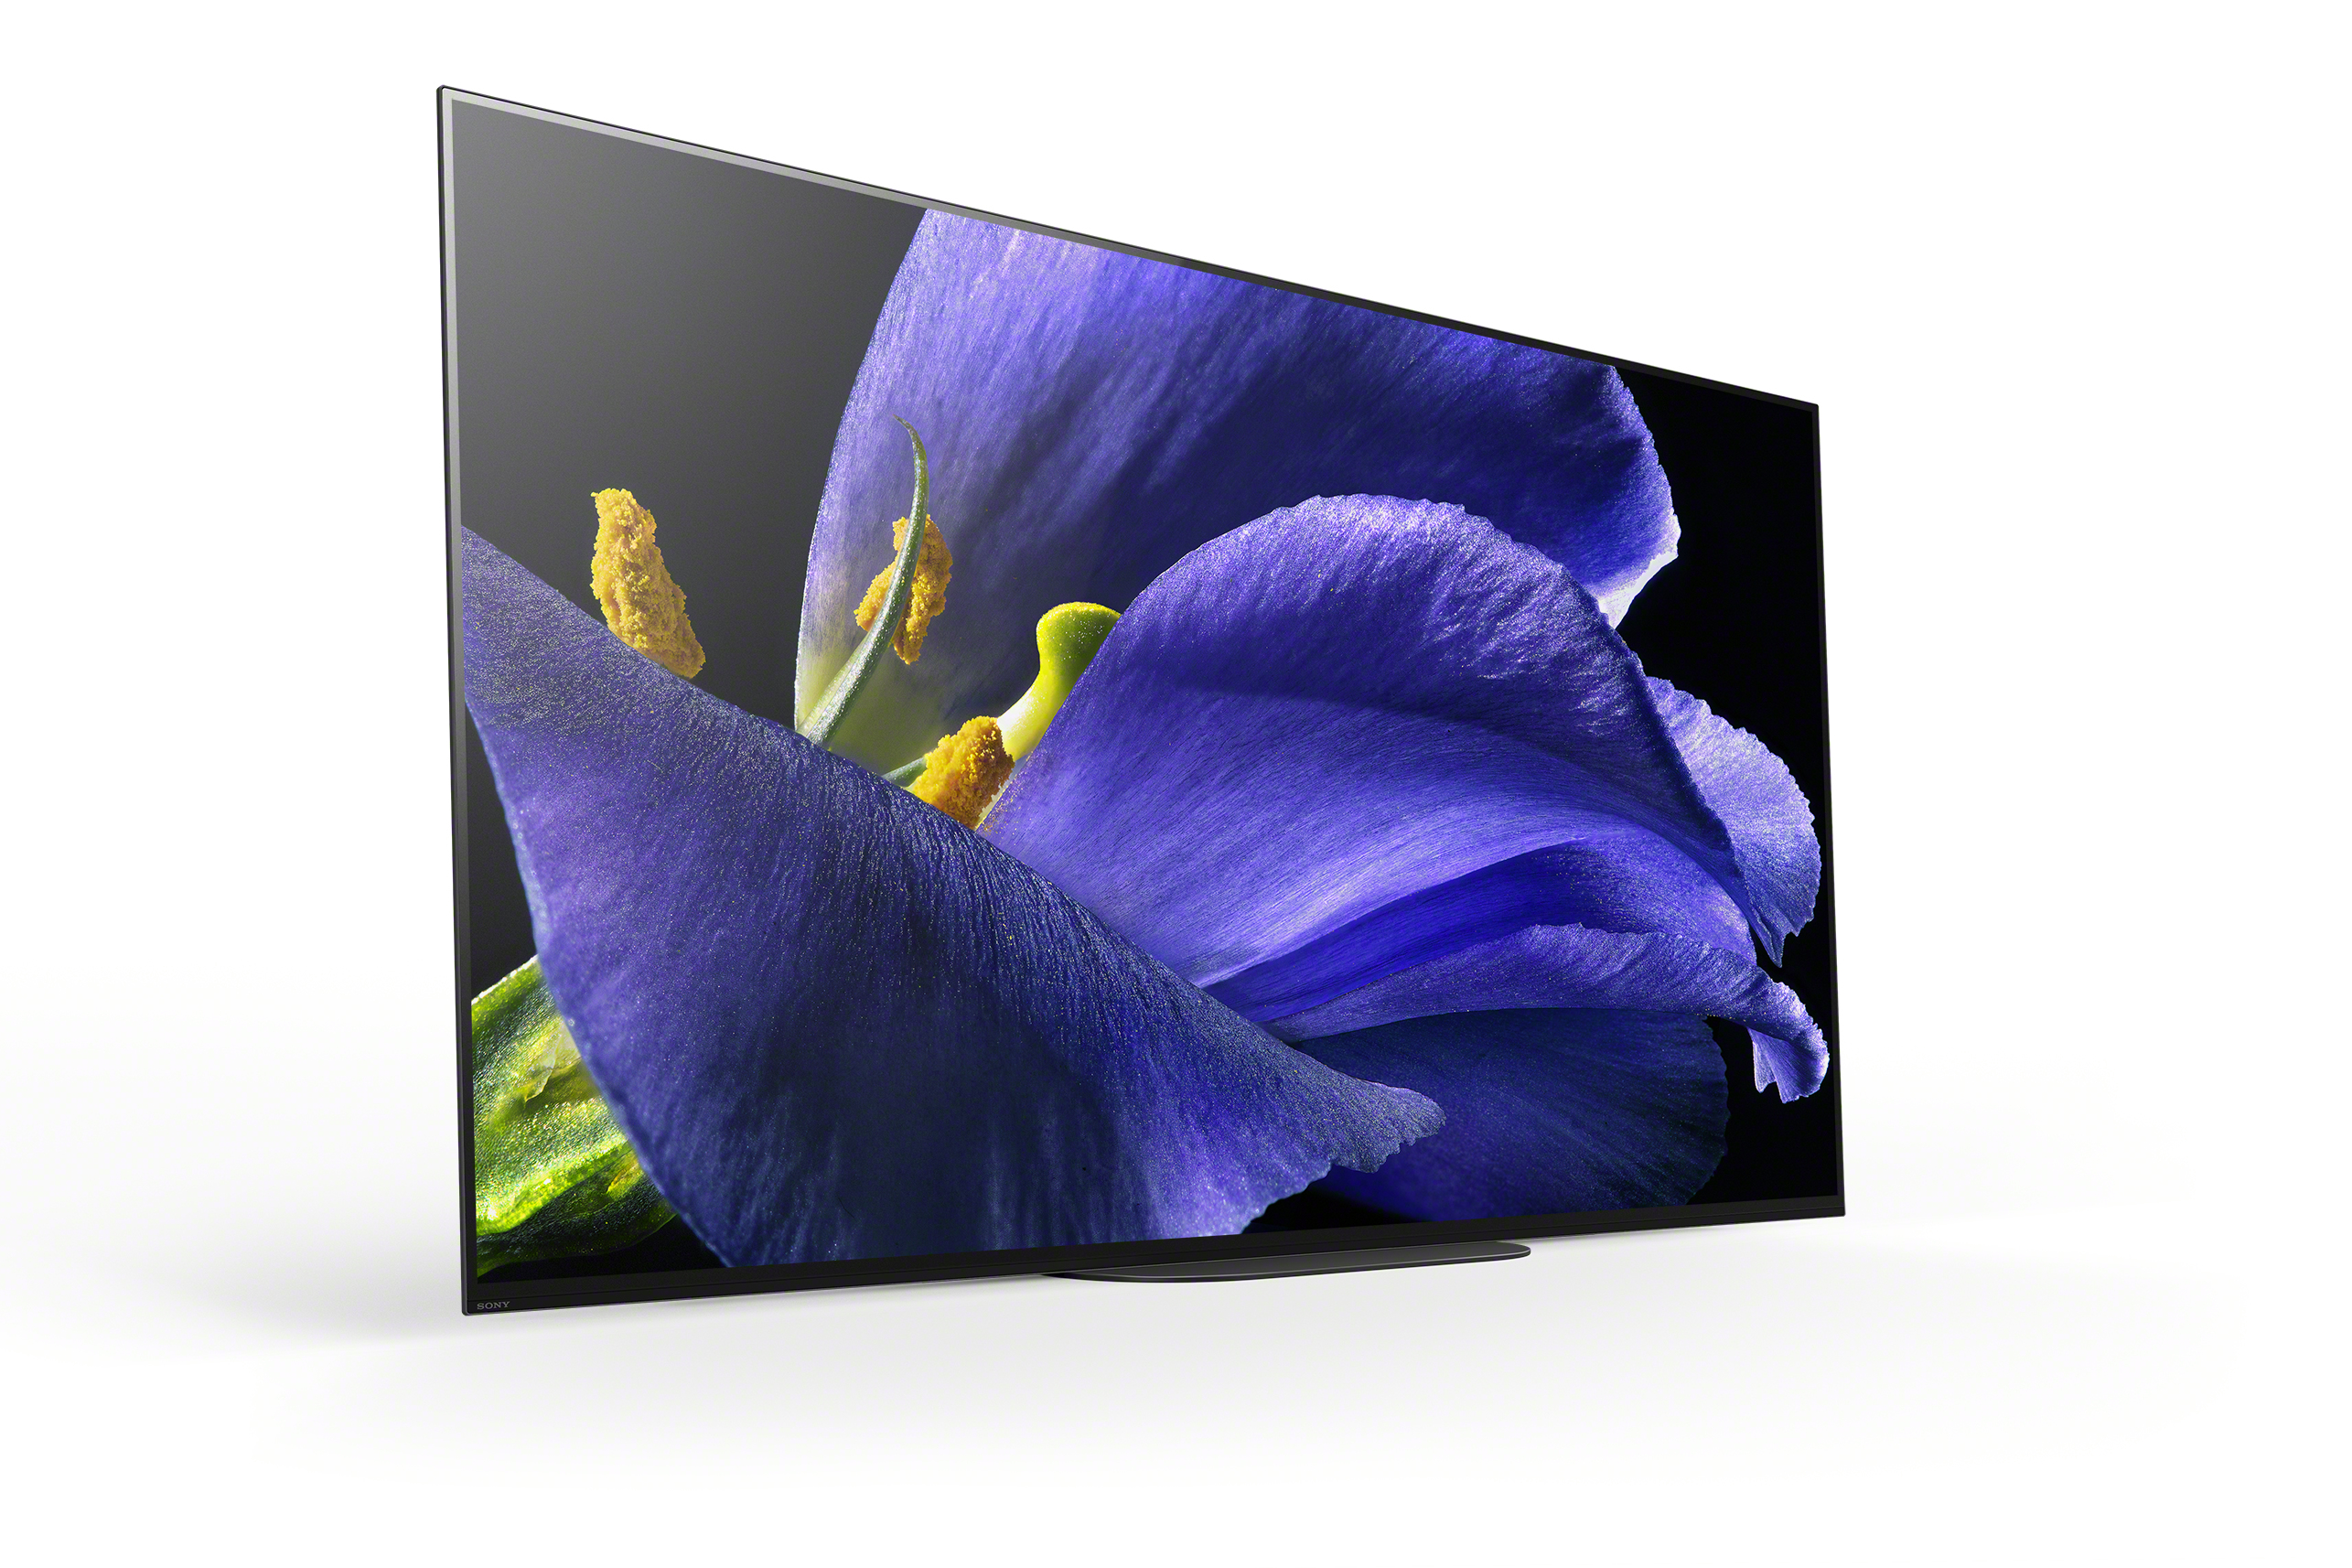 Sony 55" Class XBR55A9G 4K UHD OLED Android Smart TV HDR BRAVIA A9G Series - image 12 of 24